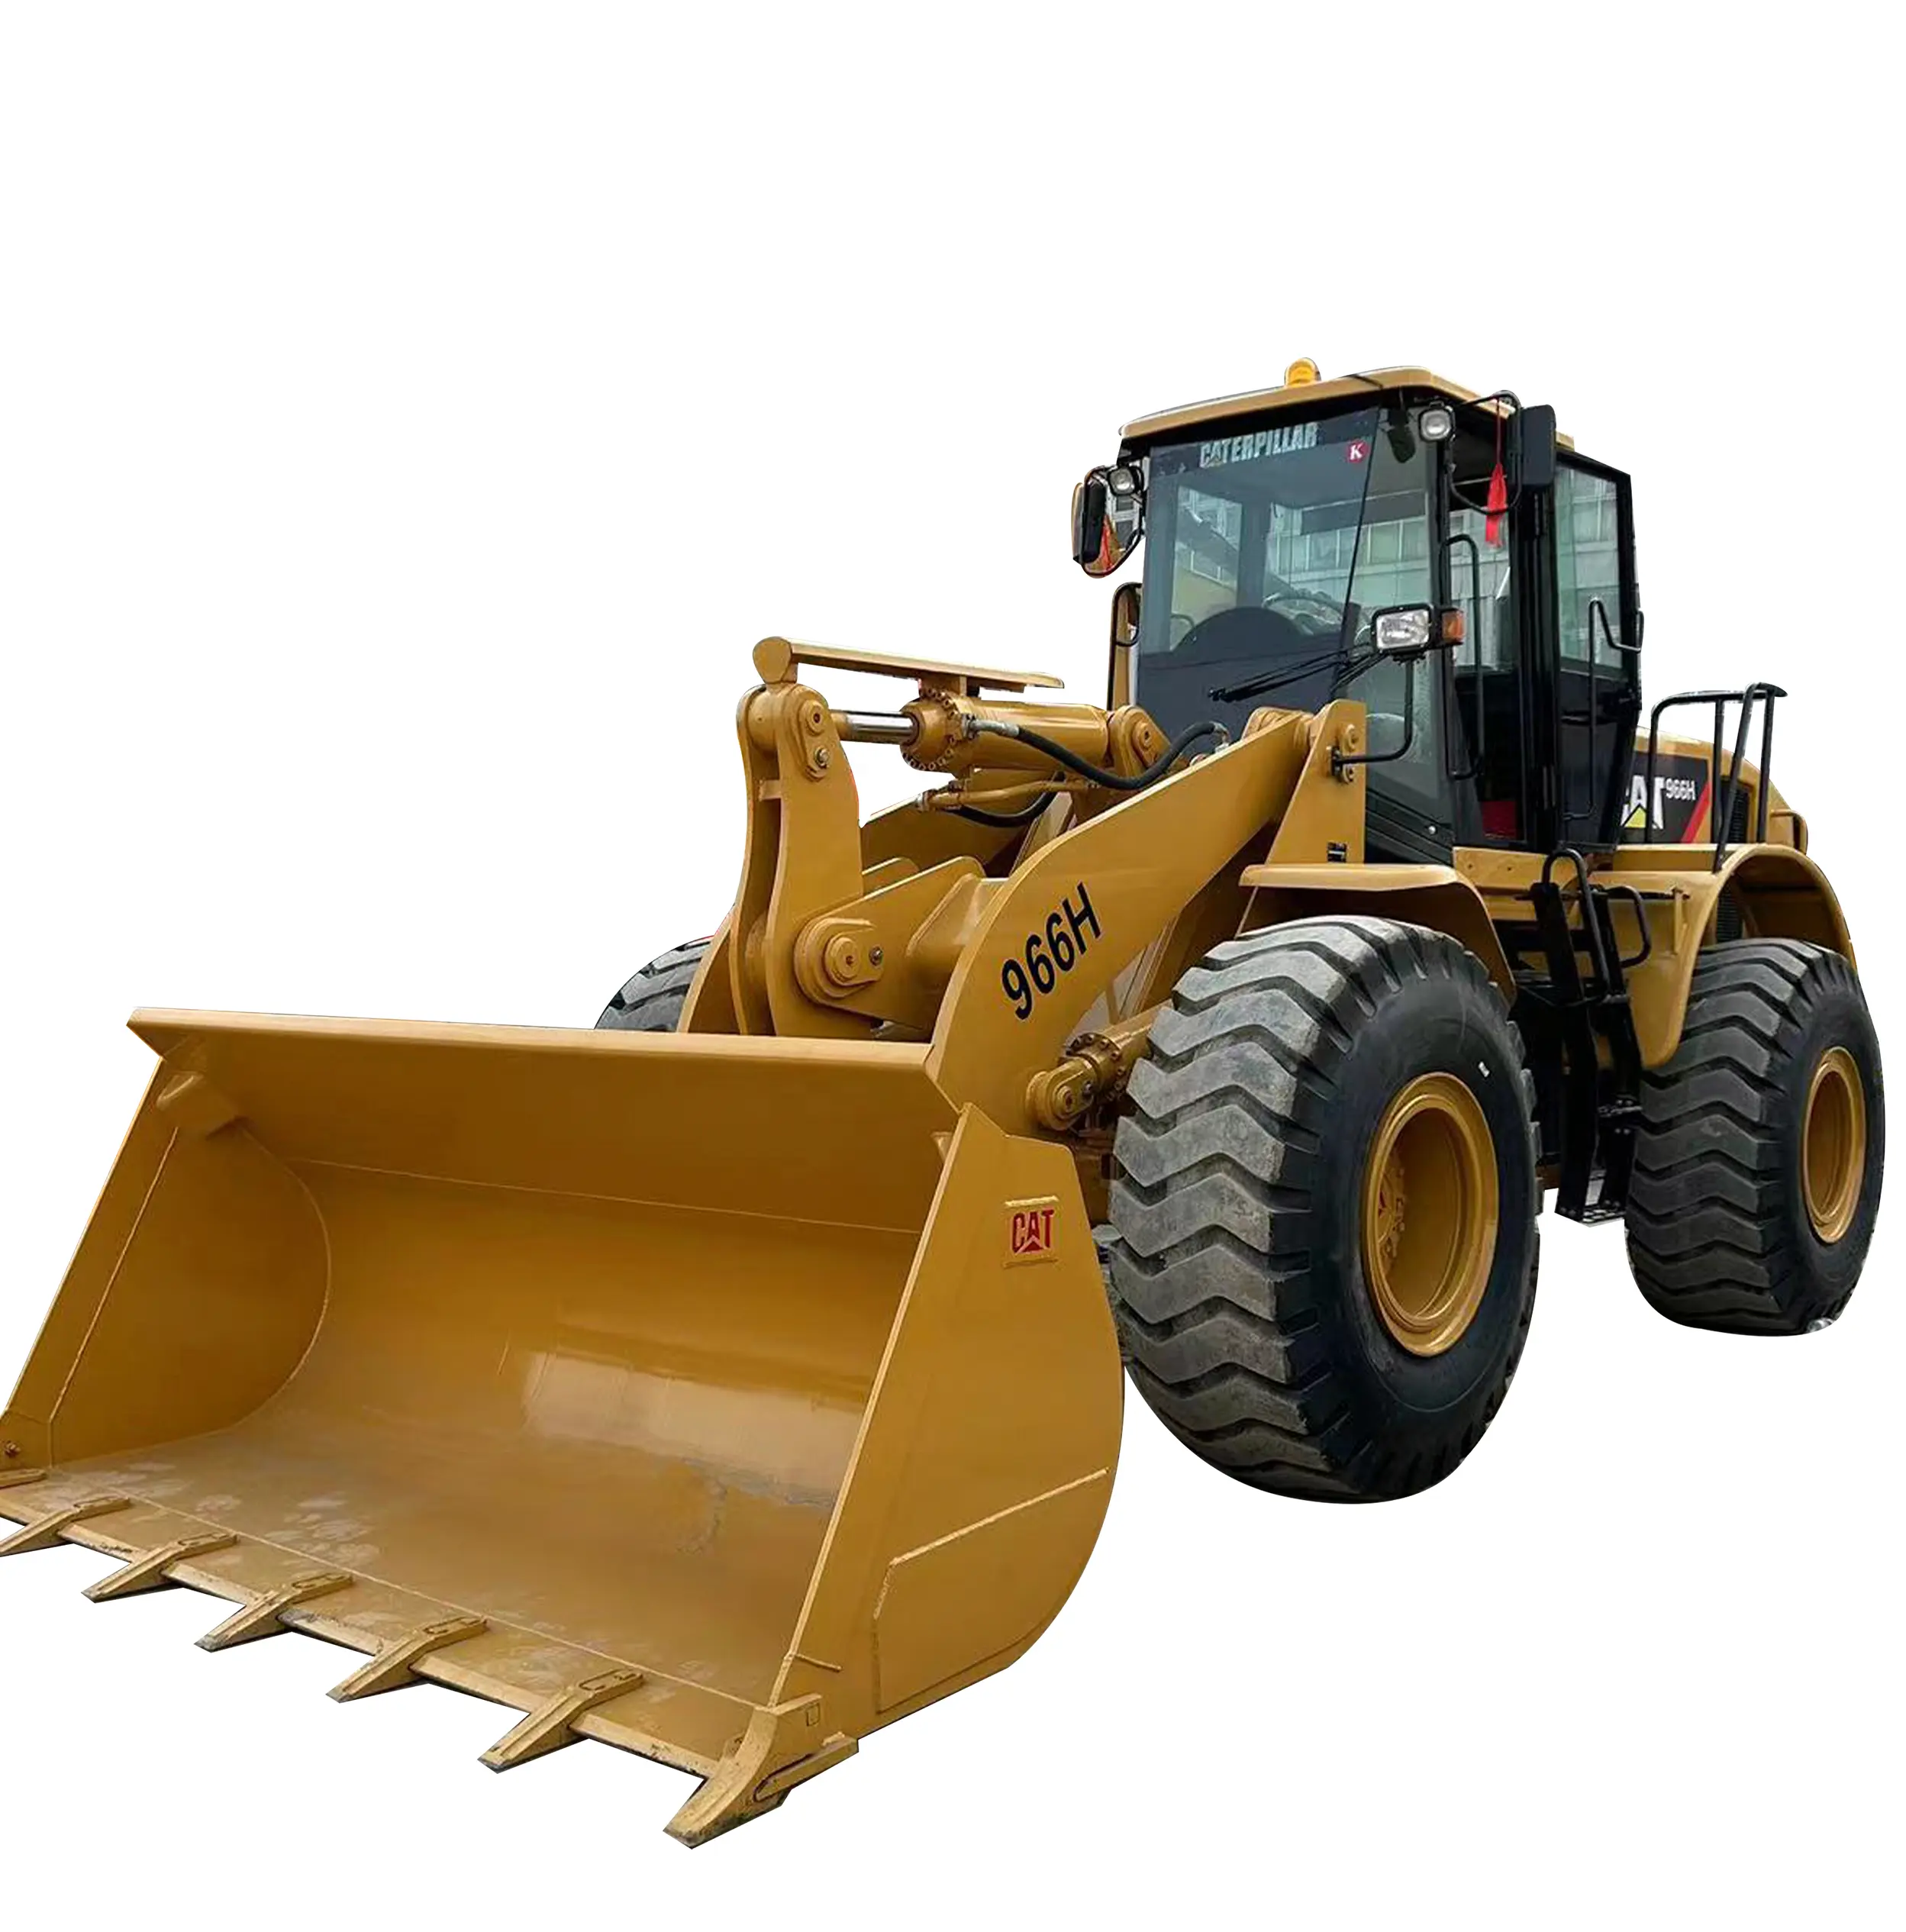 Hotselling   Caterpillar Used CAT 966H Loader for sale CAT 966H 950H 950G  CAT 966 Wheel loader in good condition